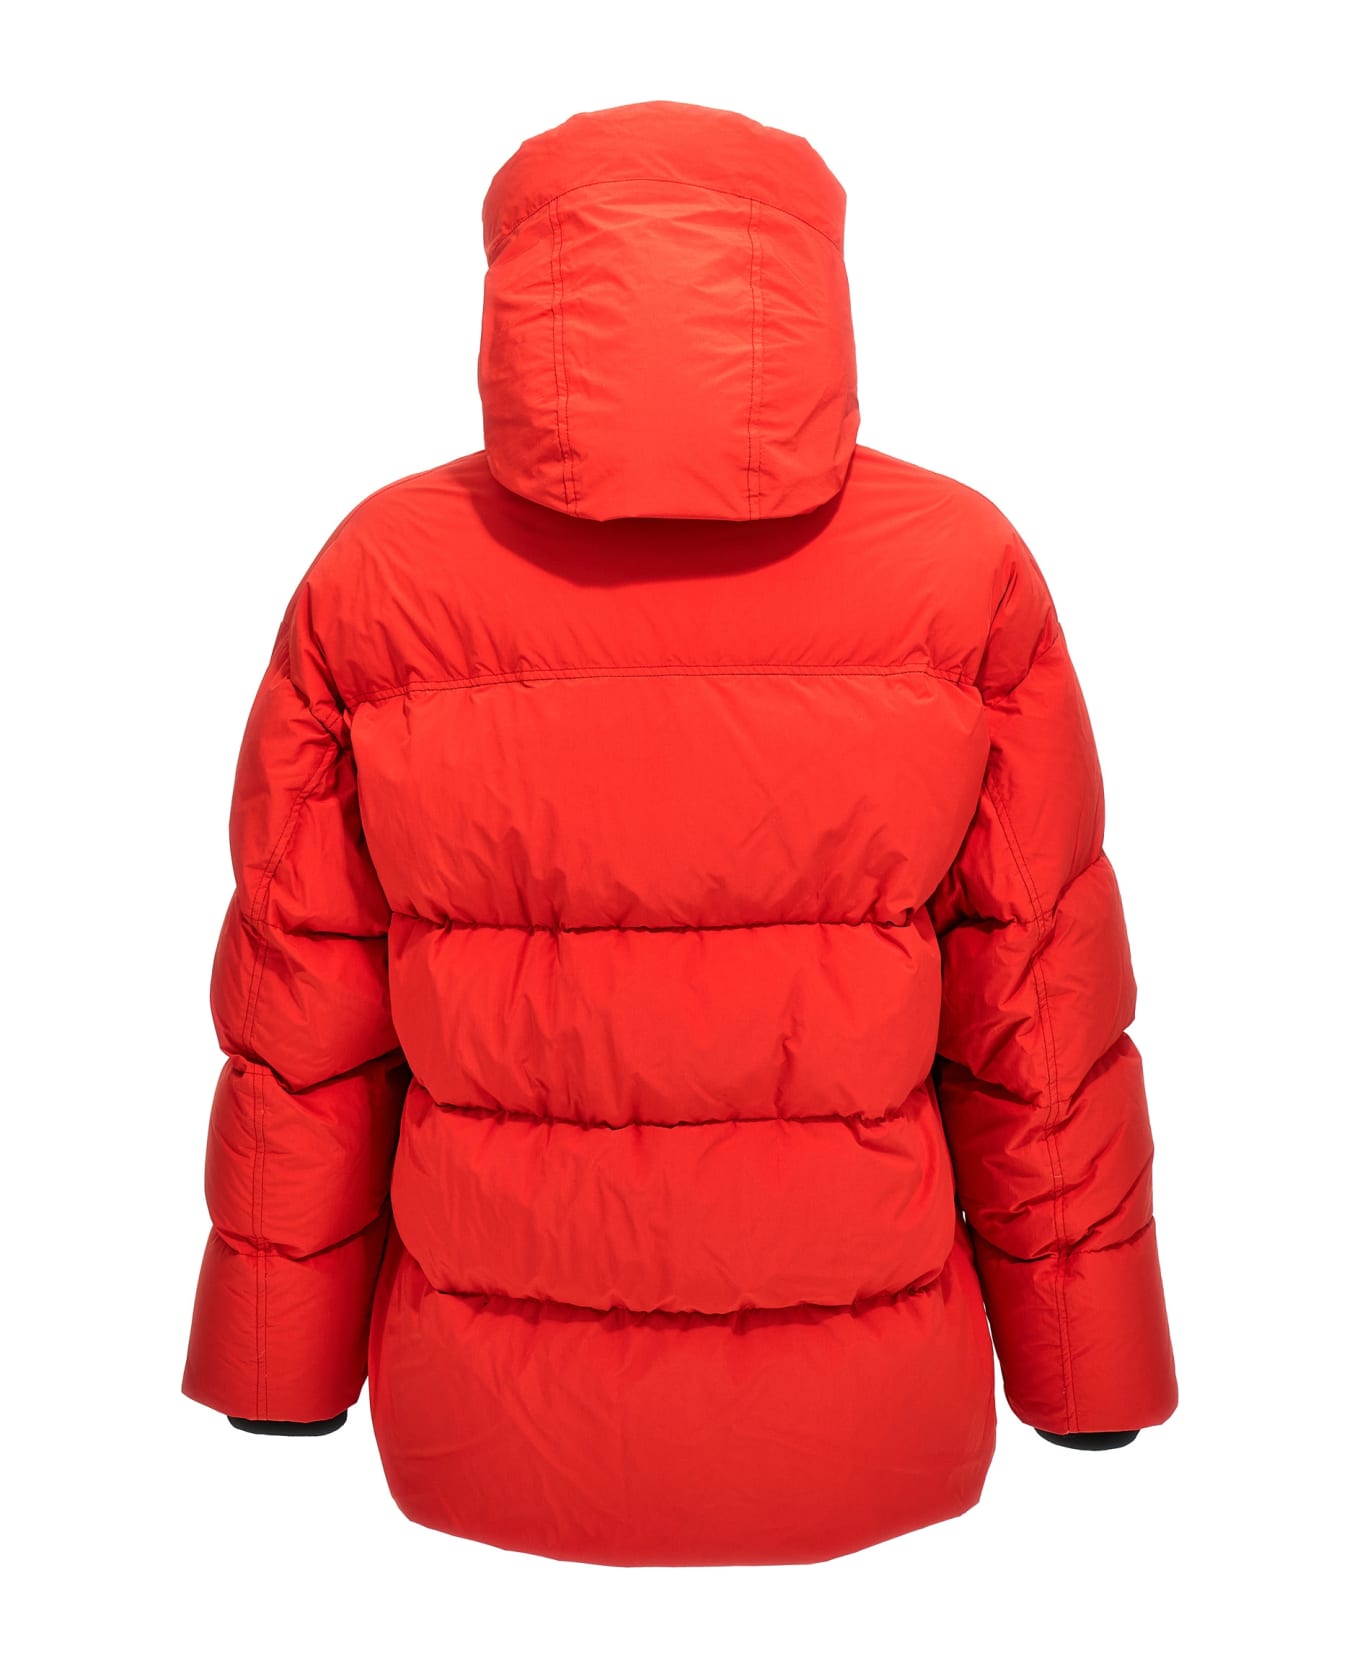 doublet 'animal Trim' Down Jacket - Red コート